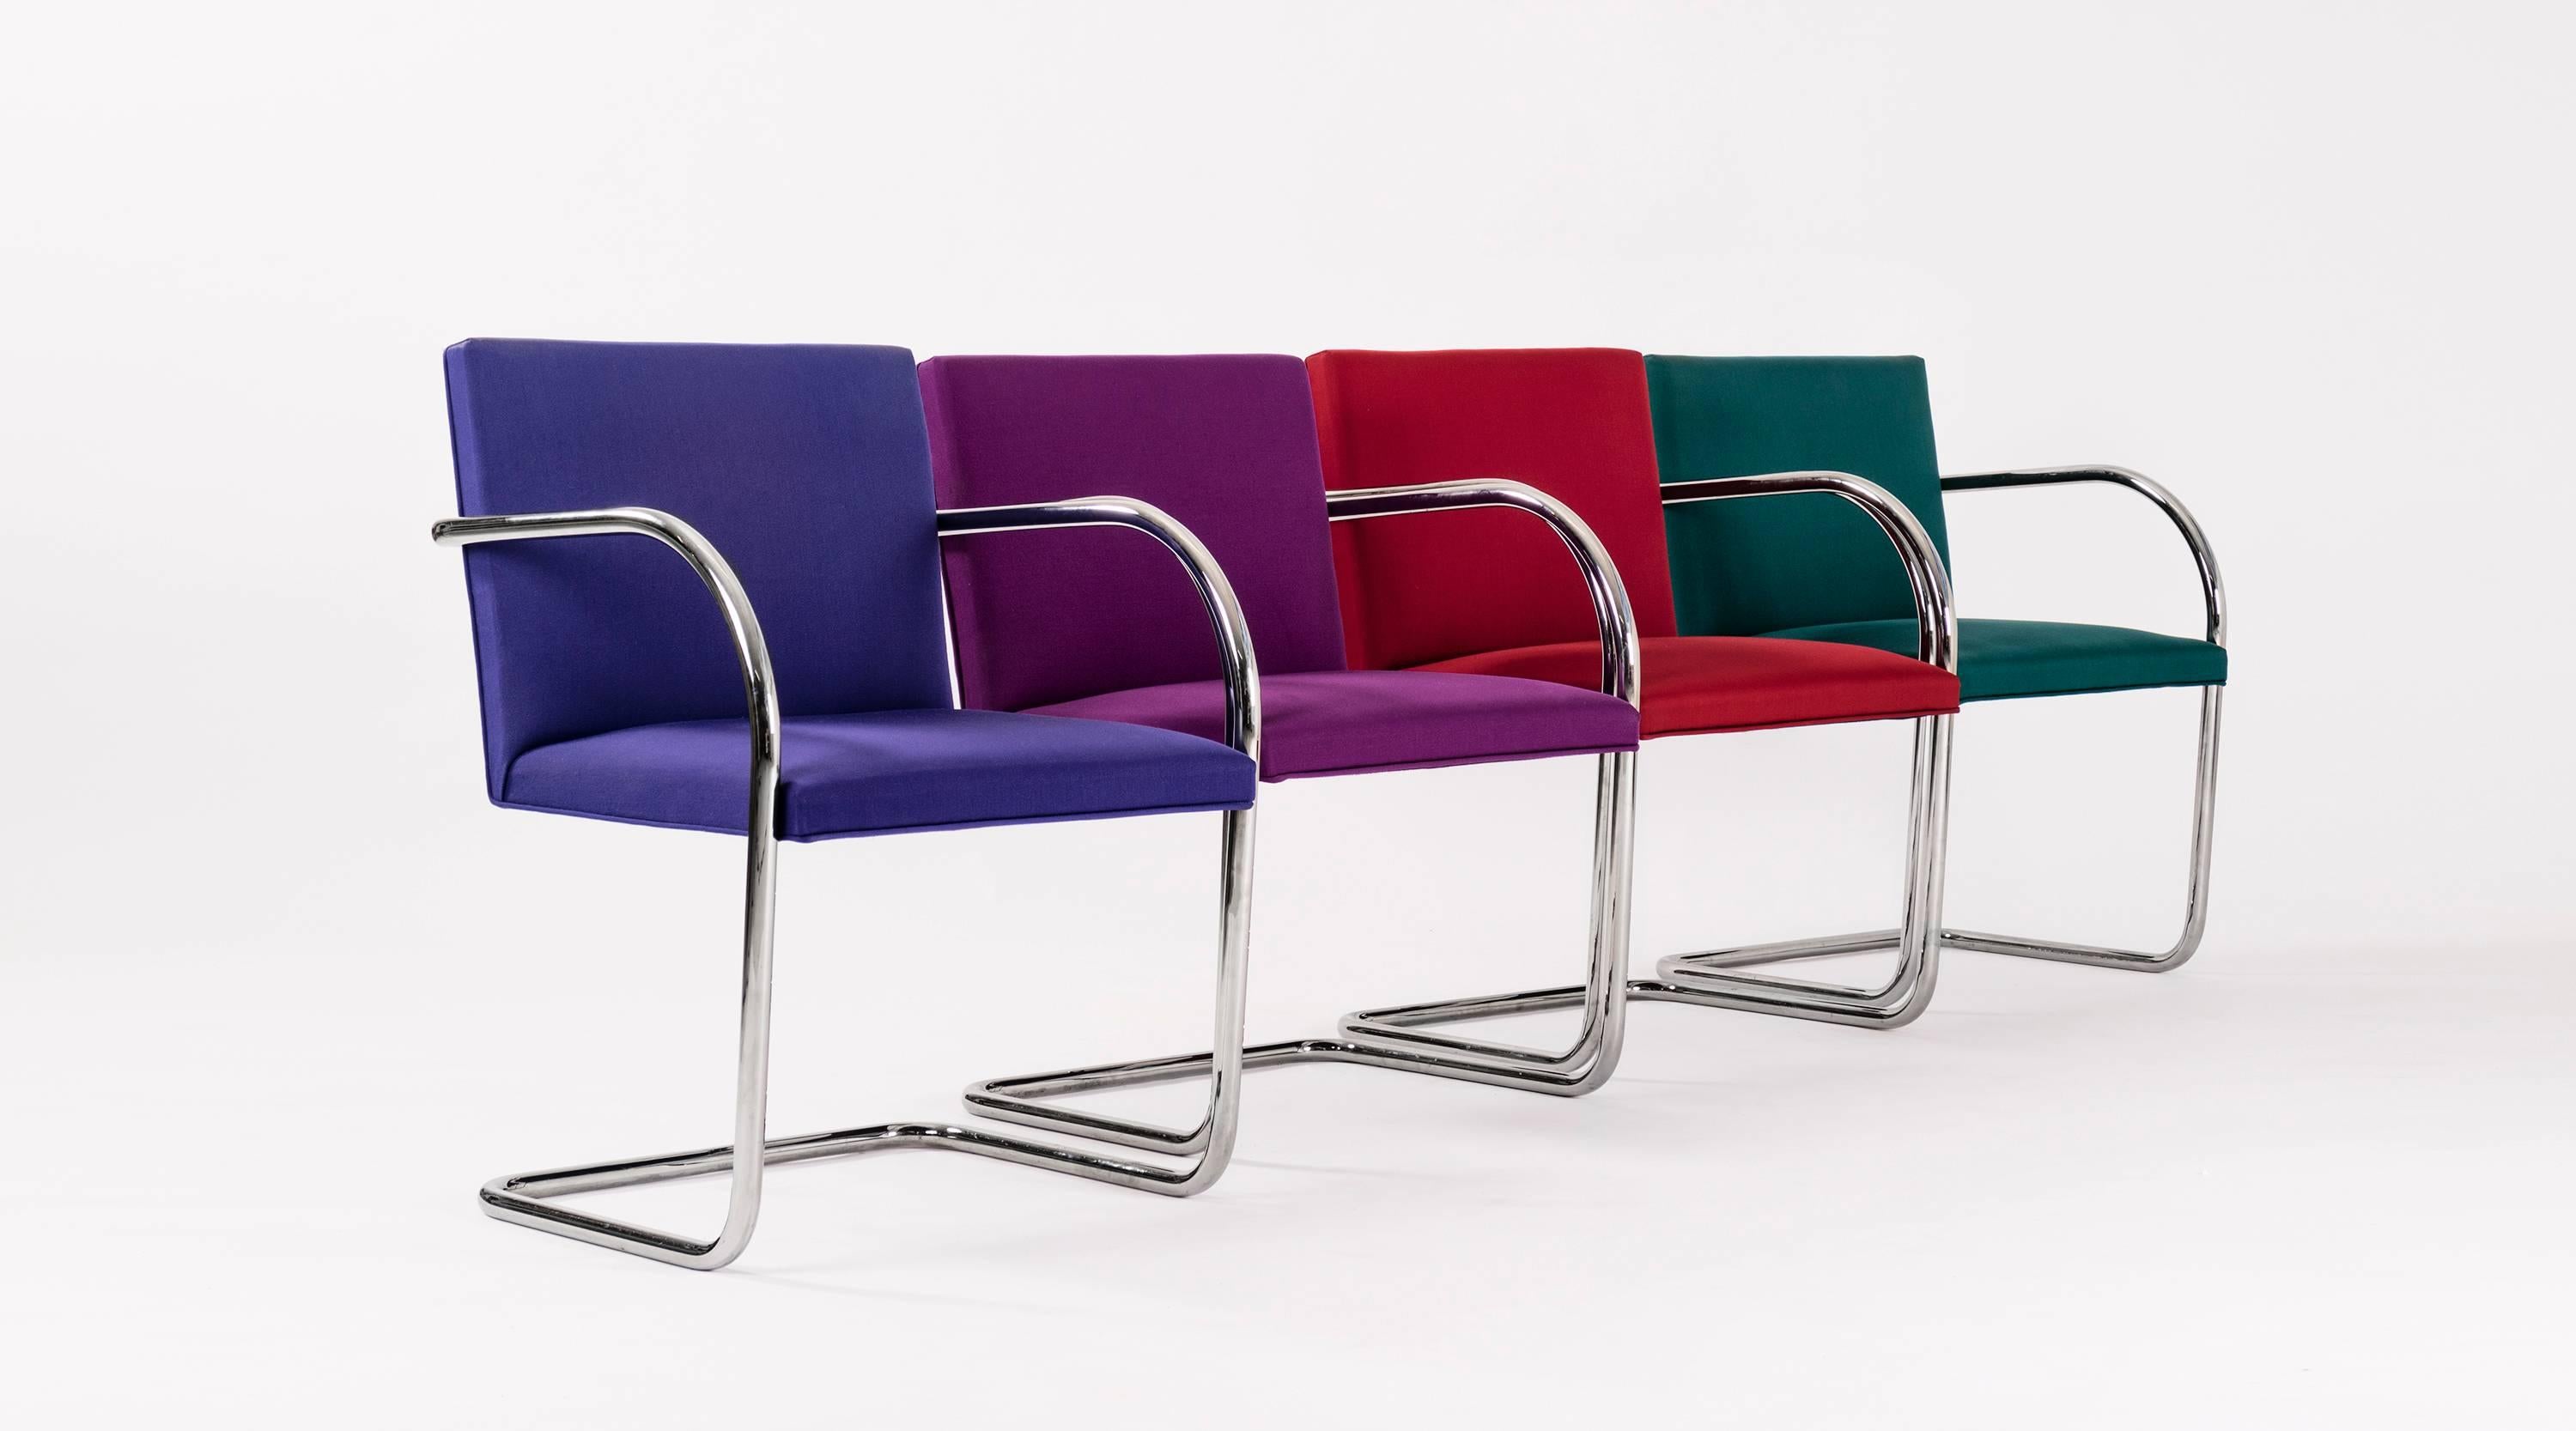 Mies; four sets of three Brno tubular chairs in crimson red, Byzantium purple, indigo blue, and pine green wool. Designed by Mies van der Rohe in 1930 for the Tugendhat House. Chrome-plated steel frame.
Signed label Knoll International.